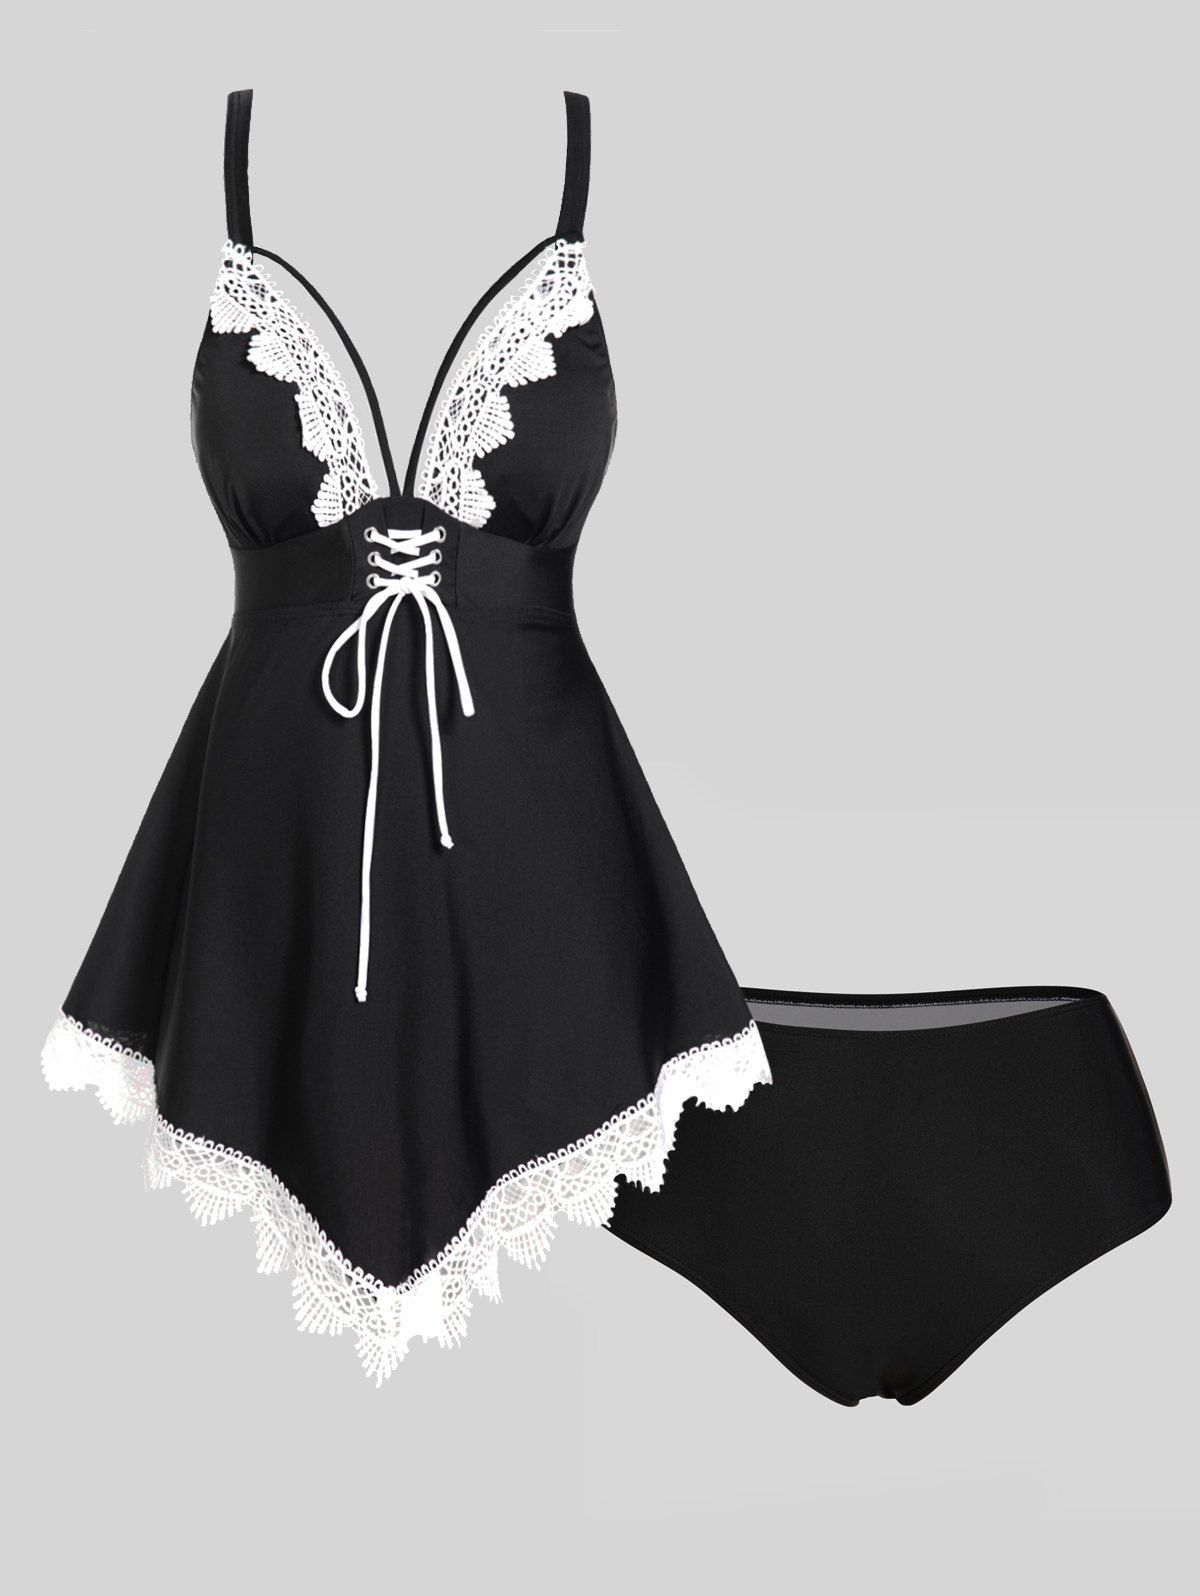 Modest Tankini Swimsuit Lace Panel Swimwear Hollow Out Lace Up Scalloped Padded Bathing Suit - BLACK L